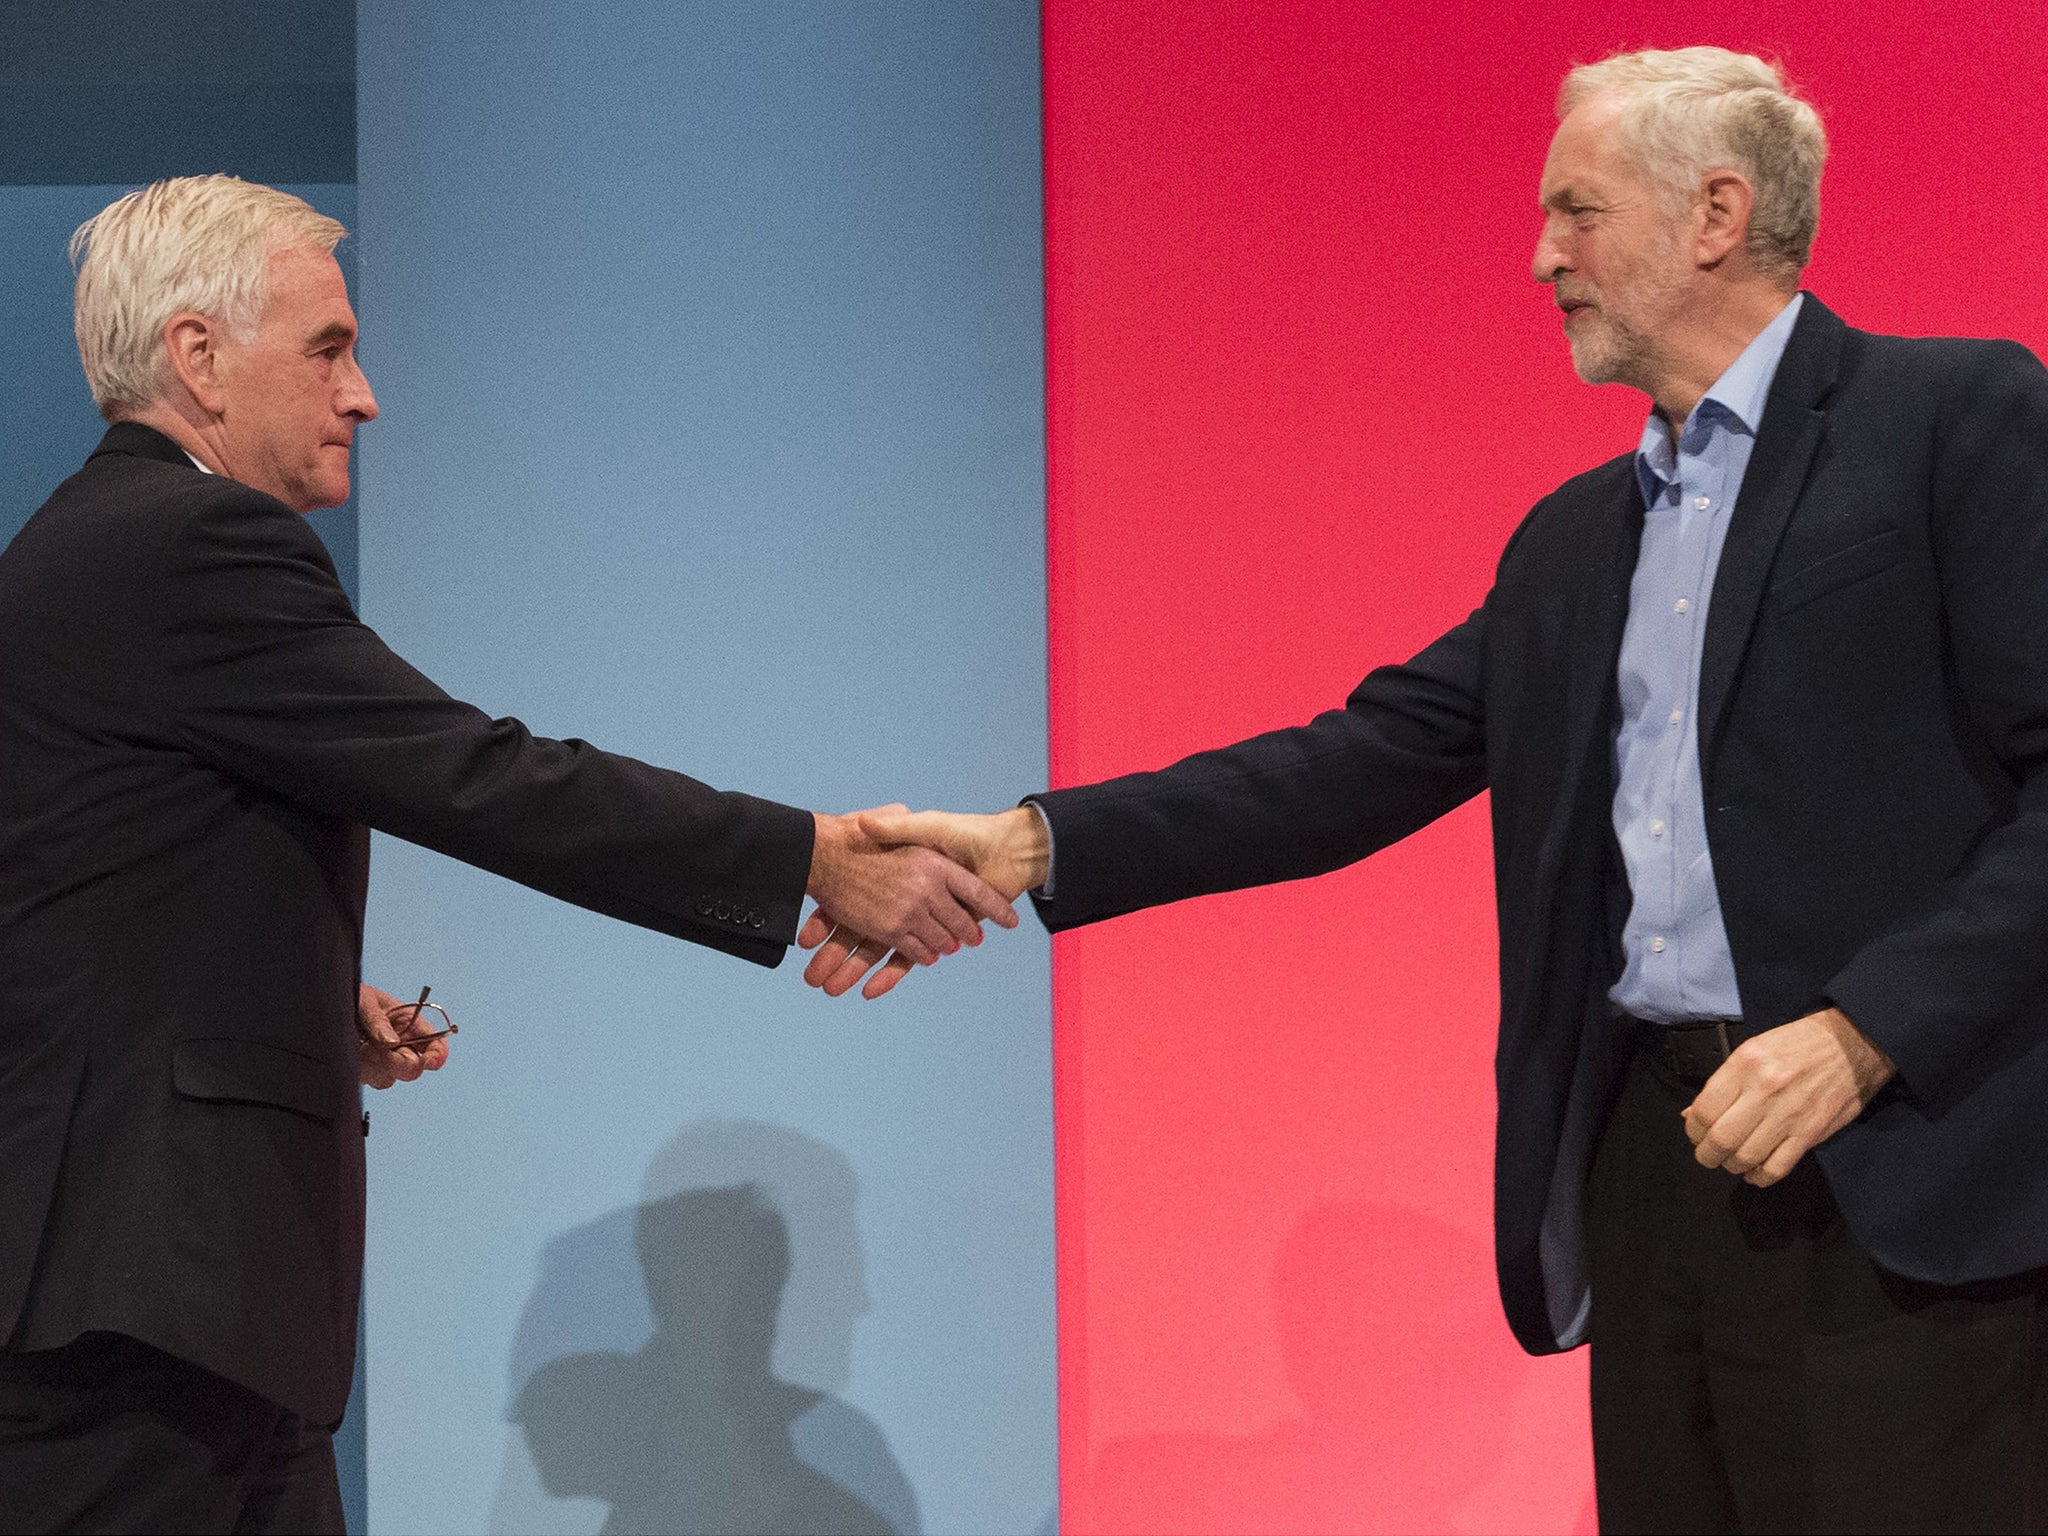 John McDonnell and Jeremy Corbyn remain firm friends